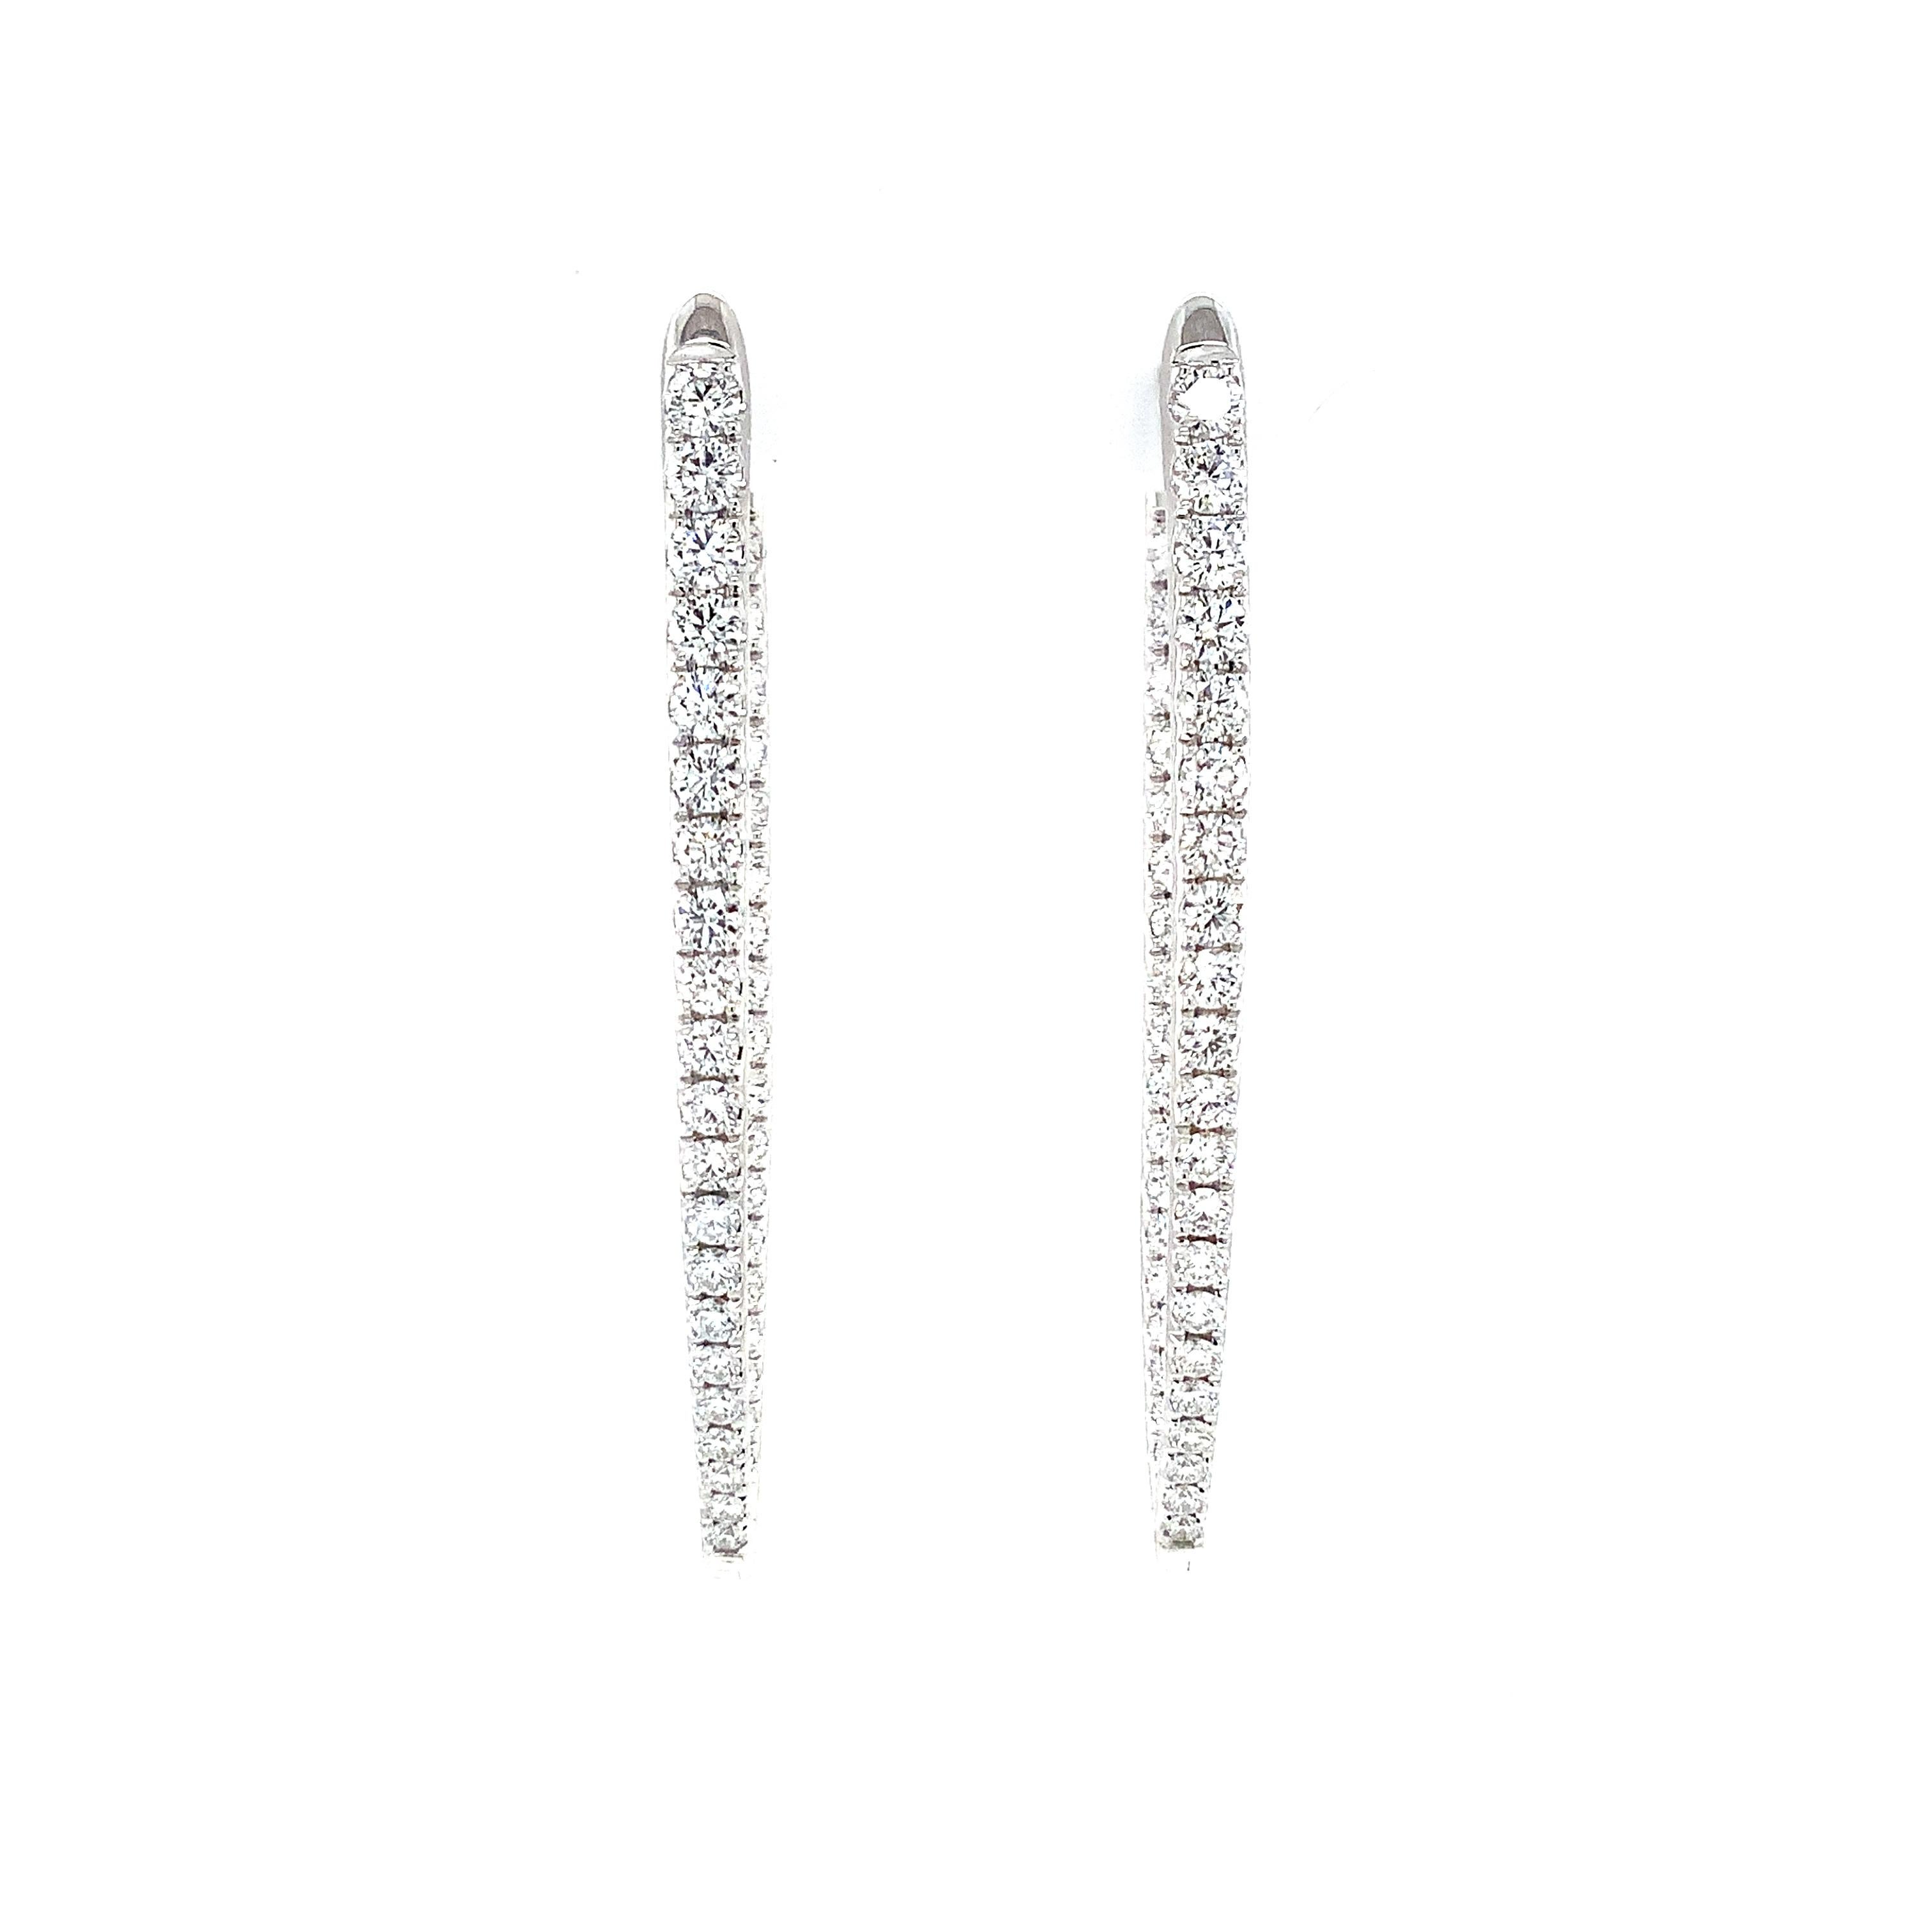 Modern Memoire Collection Imperial Hoop Diamond 2.46cts, Earring Set in 18k For Sale